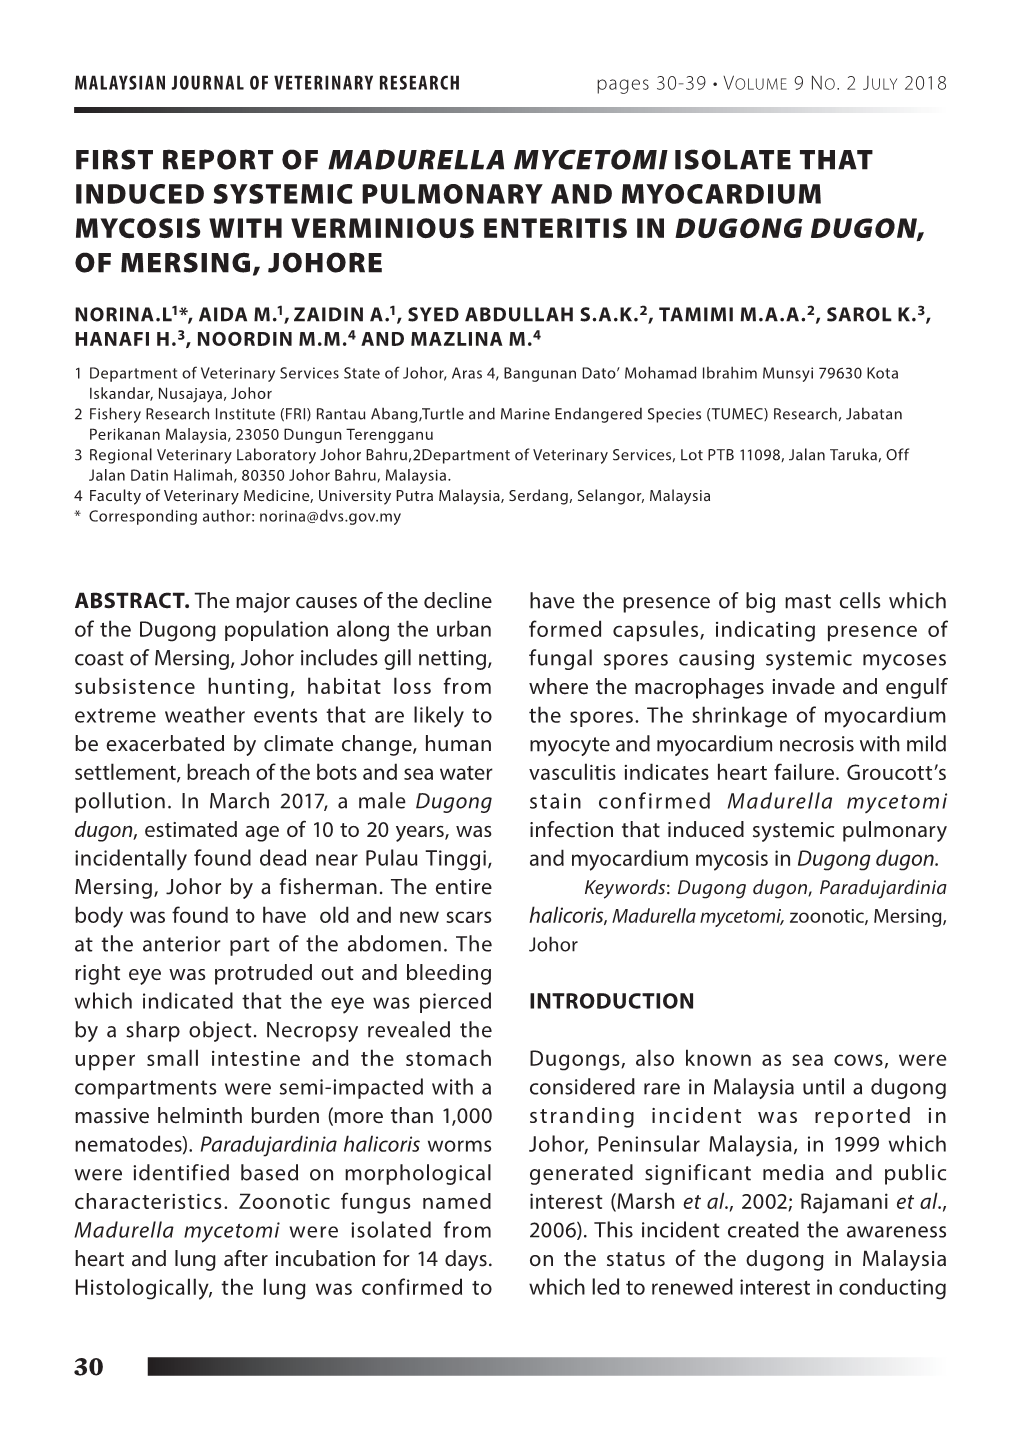 First Report of Madurella Mycetomi Isolate That Induced Systemic Pulmonary and Myocardium Mycosis with Verminious Enteritis in Dugong Dugon, of Mersing, Johore